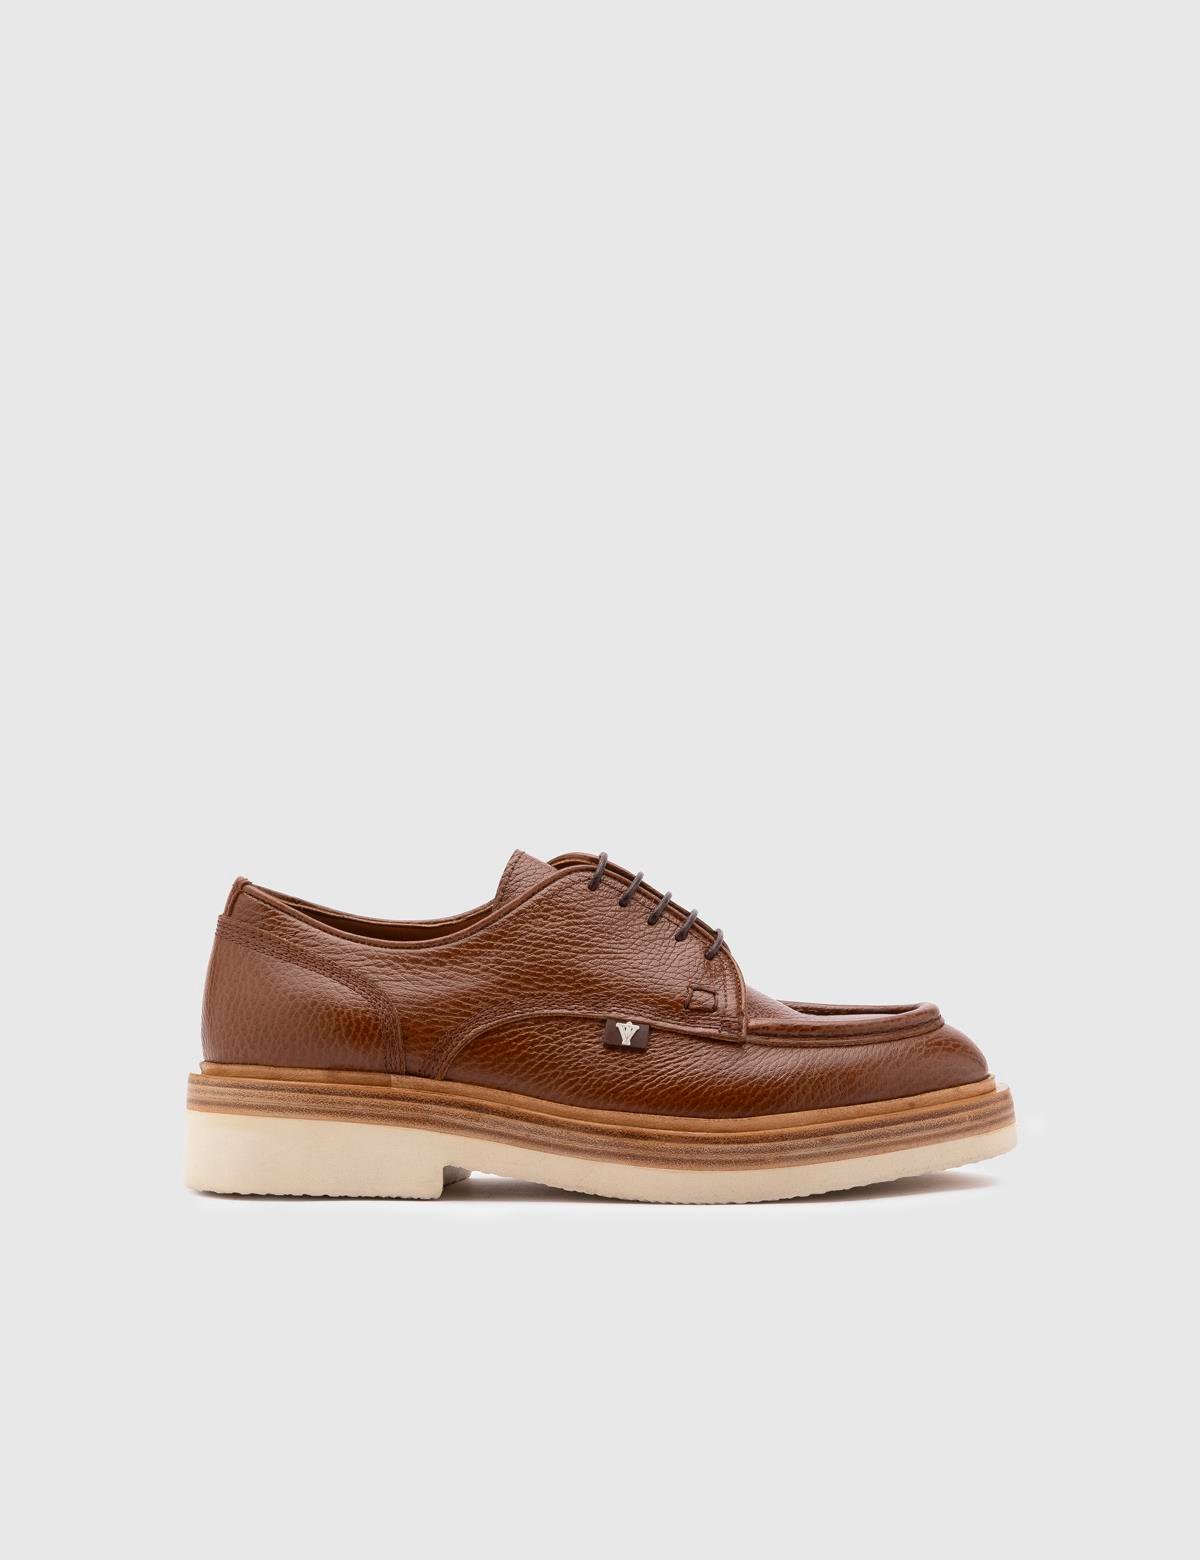 Clemente Saddle Brown Floater Leather Men's Oxford